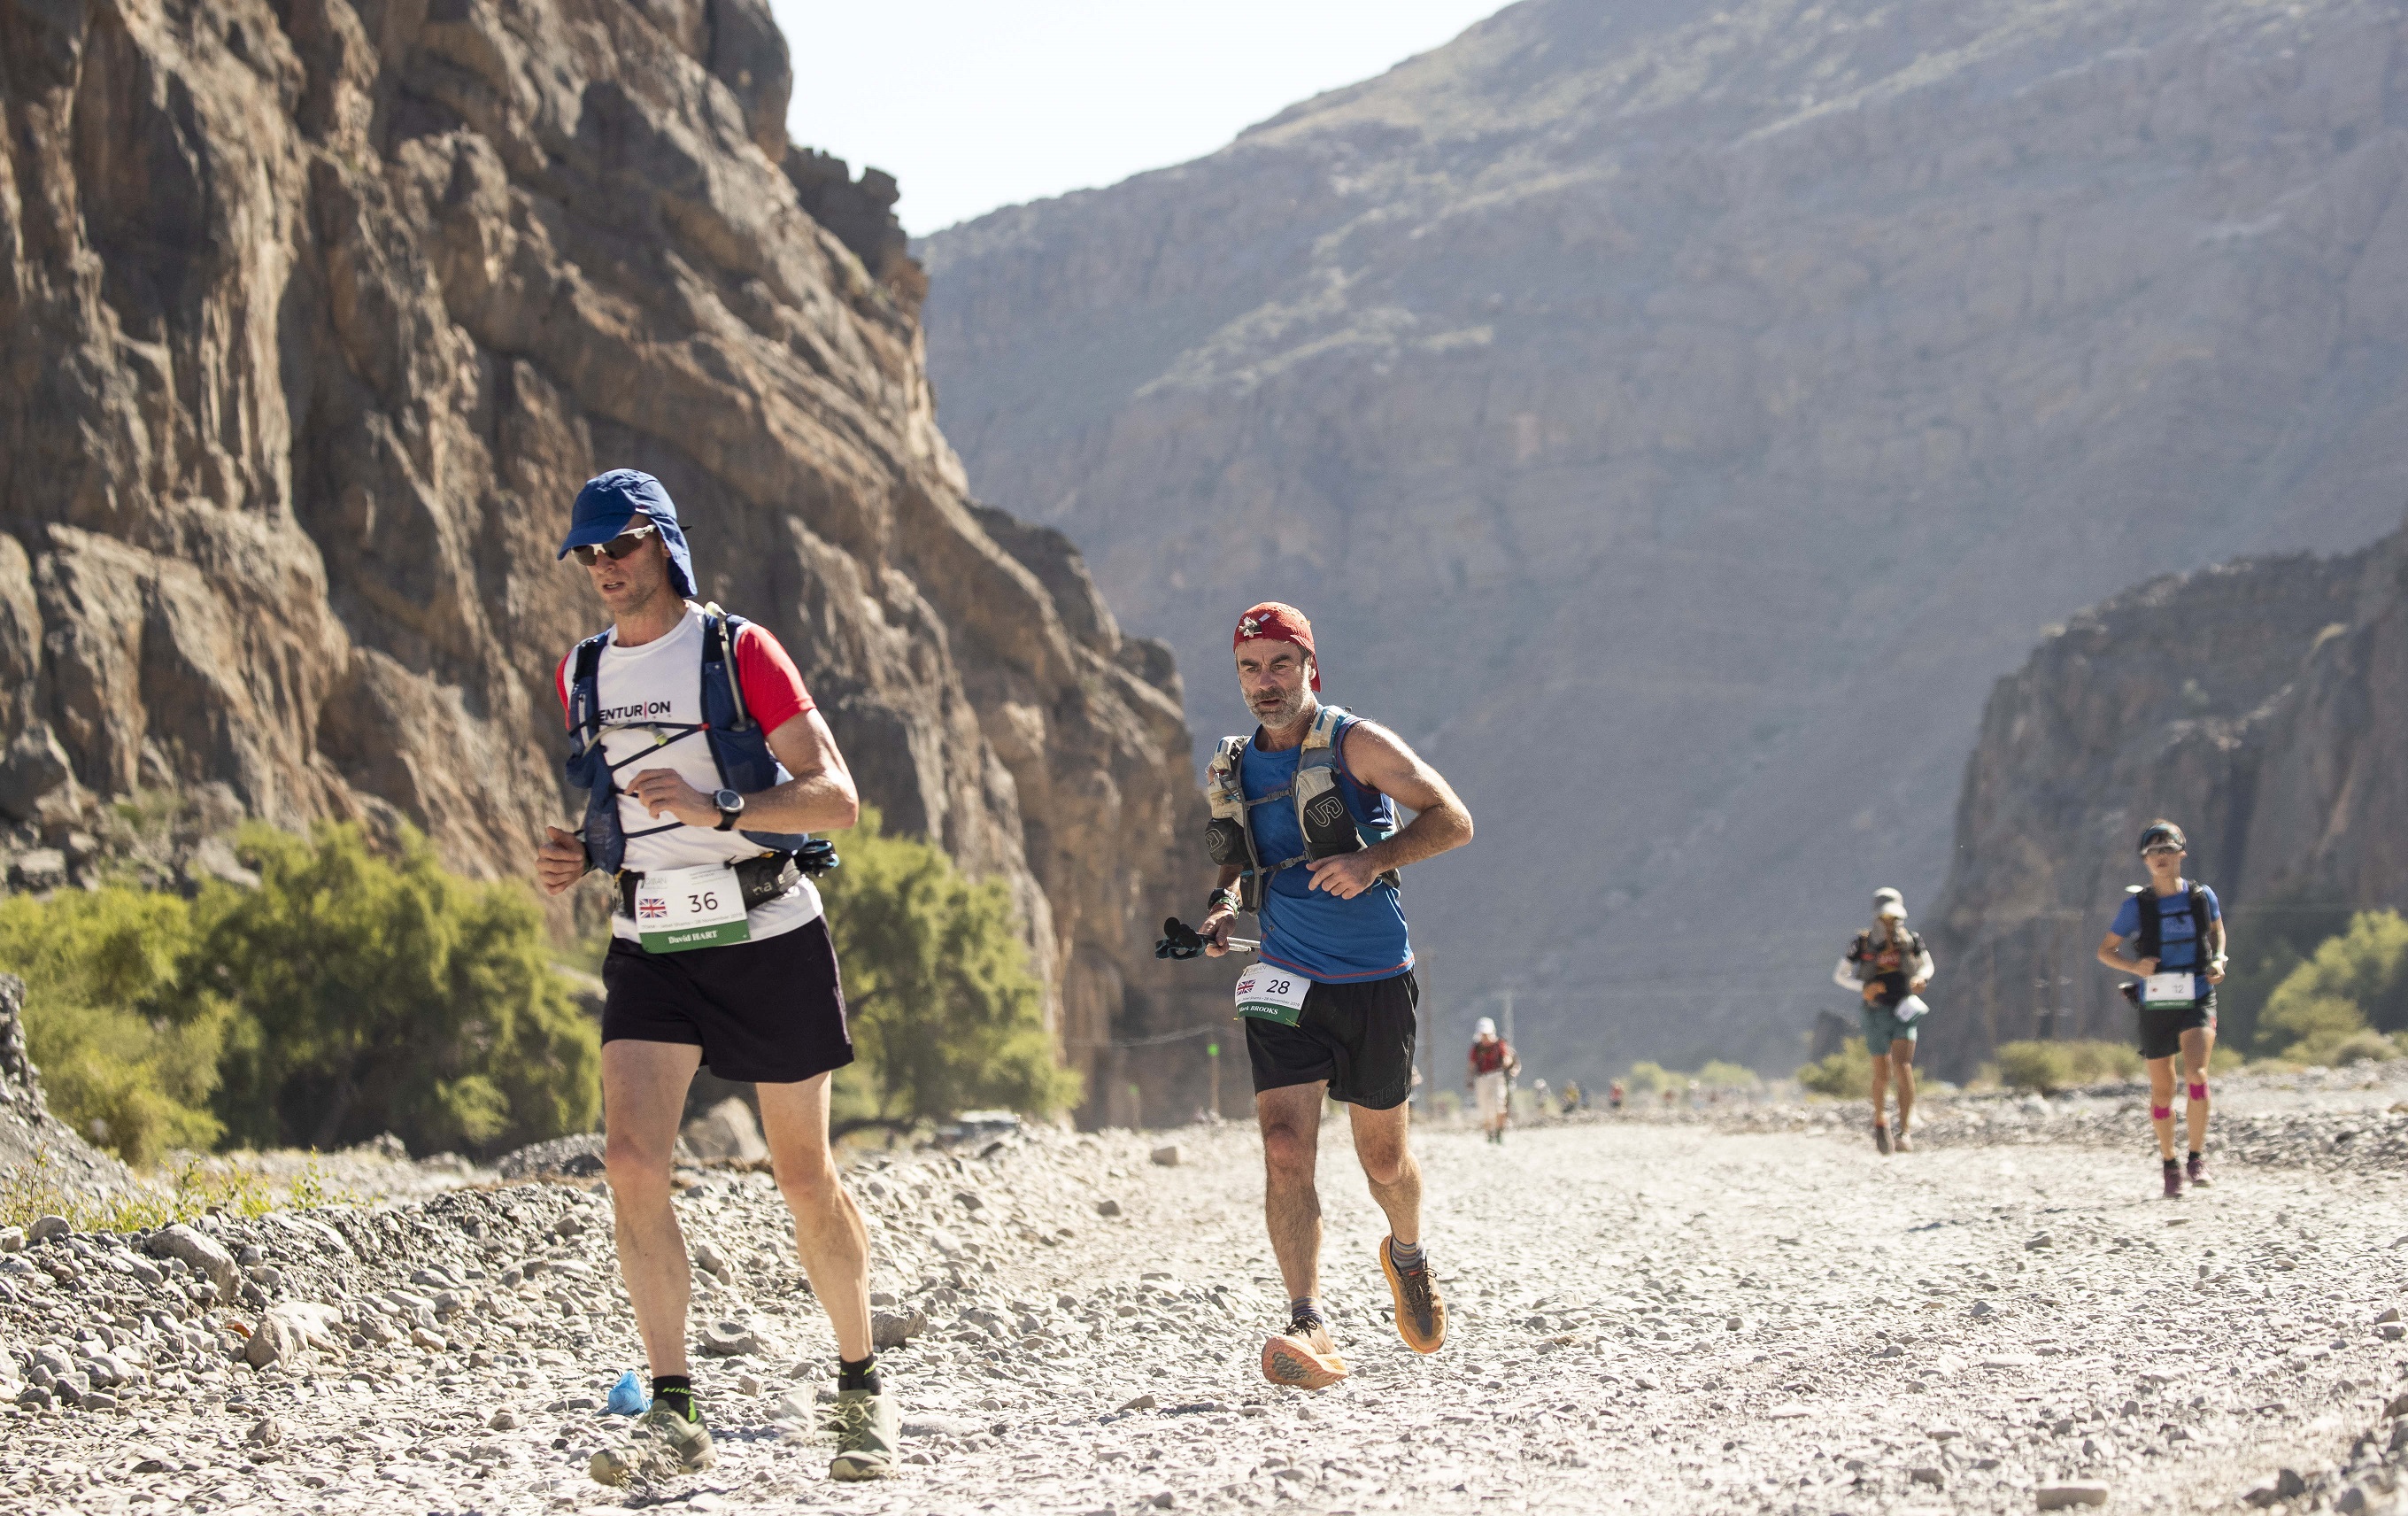 International runners laud Oman’s beauty and nature